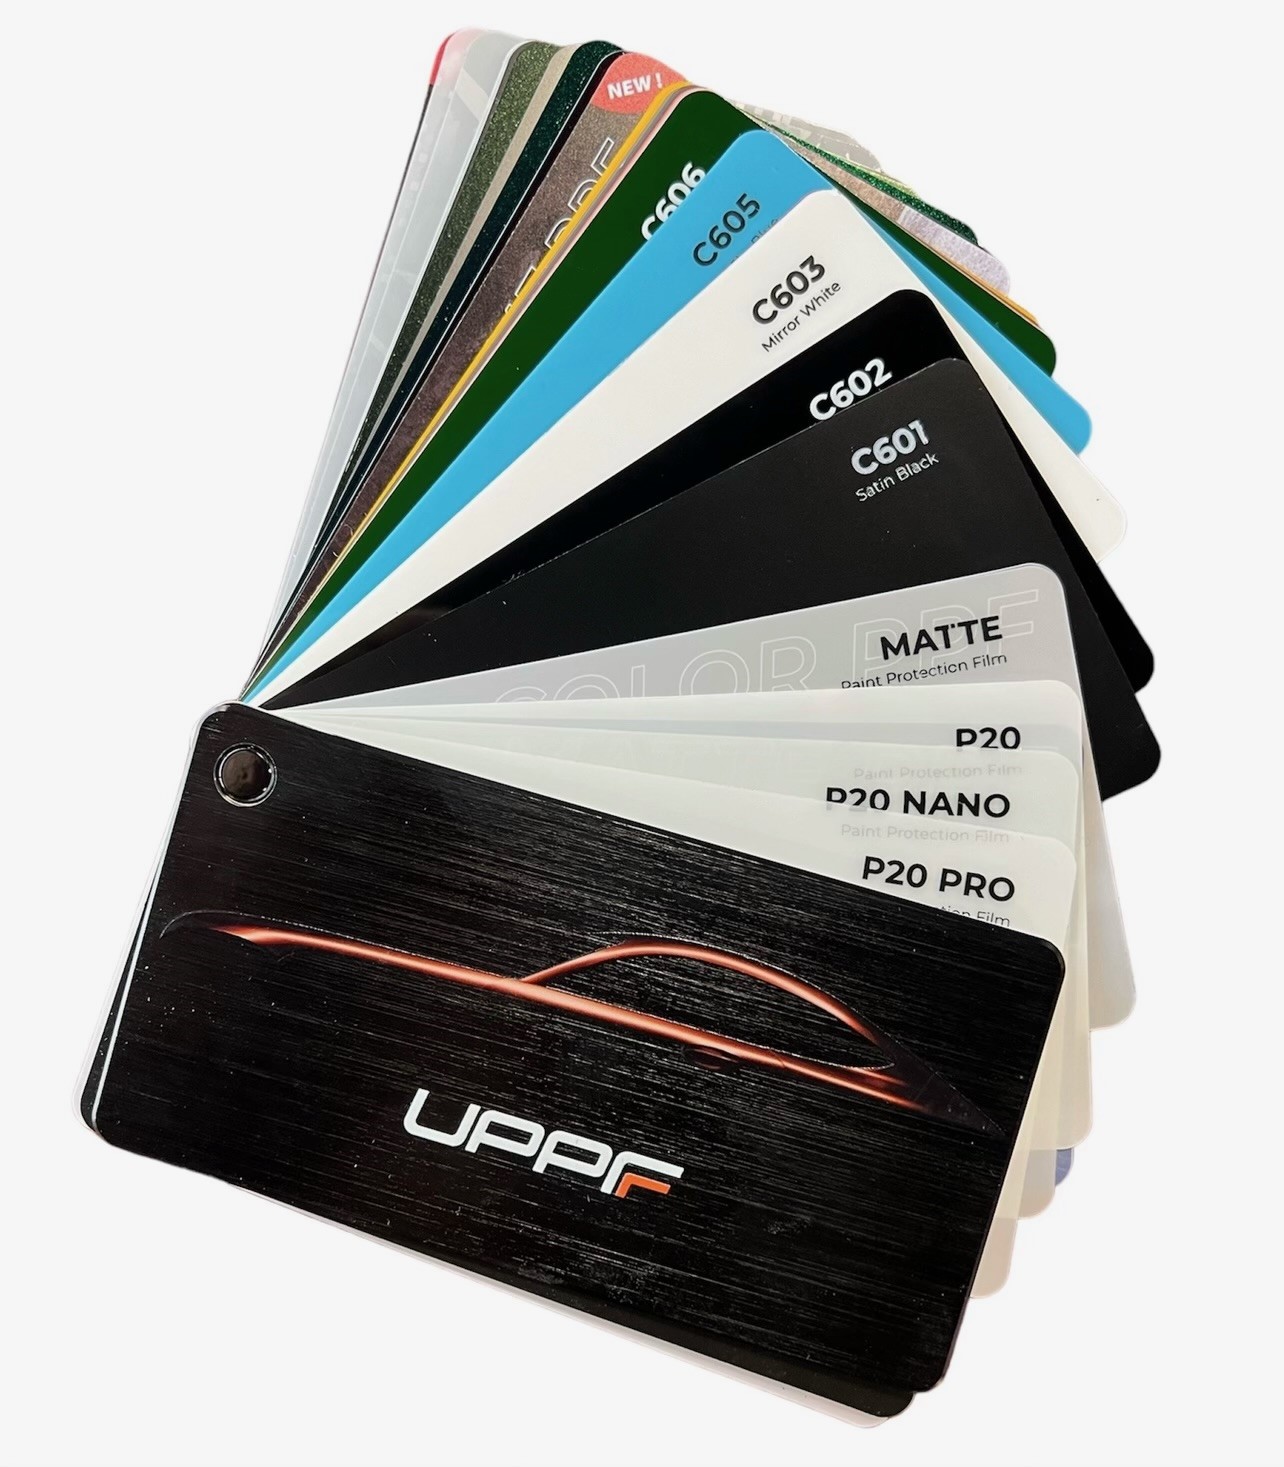 UPPF Paint Protection Film Fan Deck Swatch Book